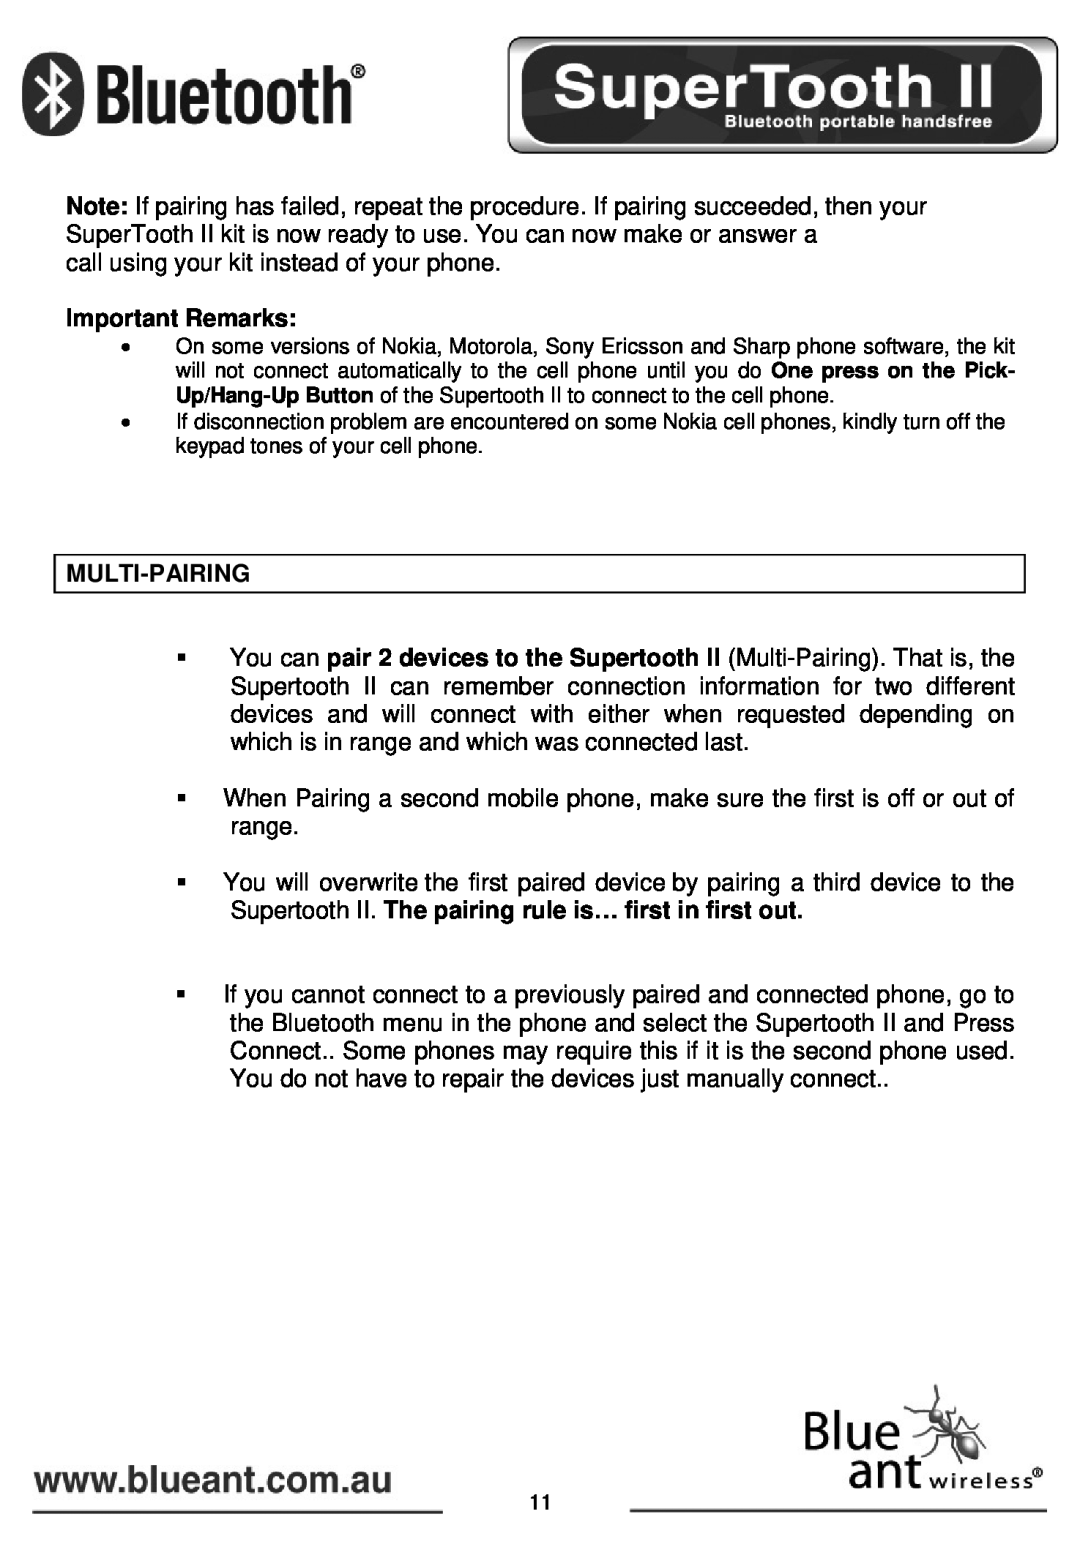 BlueAnt Wireless SUPERTOOTH II manual Important Remarks, Multi-Pairing 